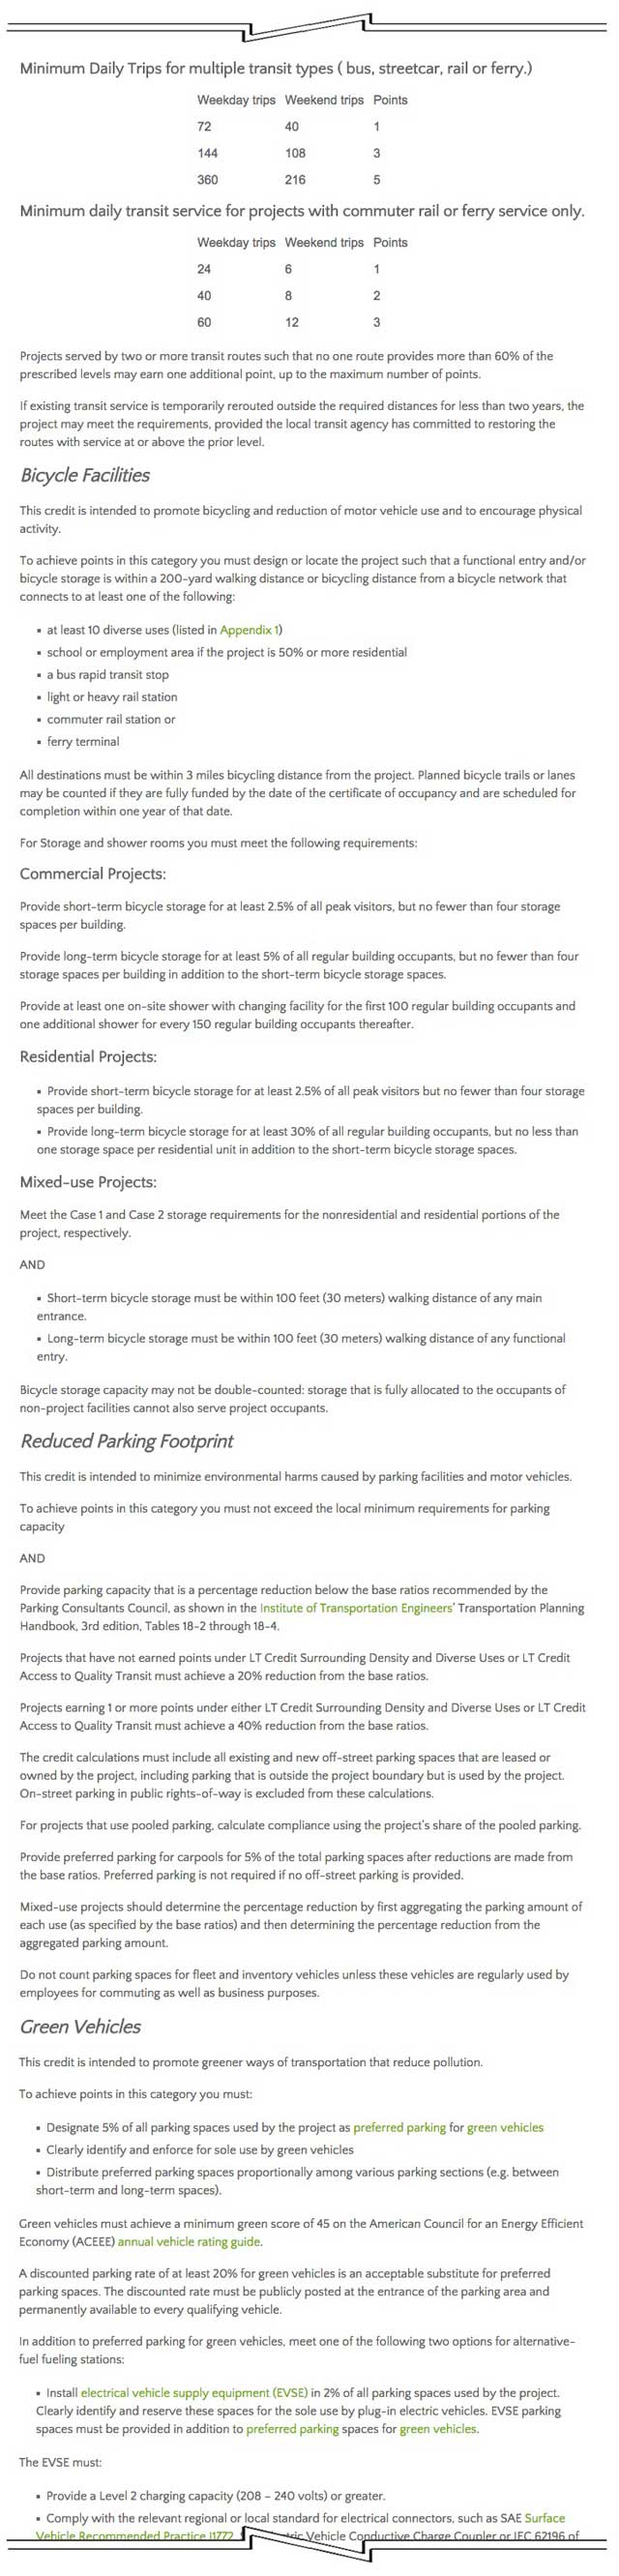 Jacky Tustain (Project Manager) also continued helping us convert the LEED Certification research done by Matheus Manfredini (Civil Engineering Student and Urban Design Coordinator) into a webpage. Here are the 2nd round of pictures of this LEED Tutorial page developing on the site, continuing with formatting and content editing. We’d say we’re about 25% complete with this tutorial.